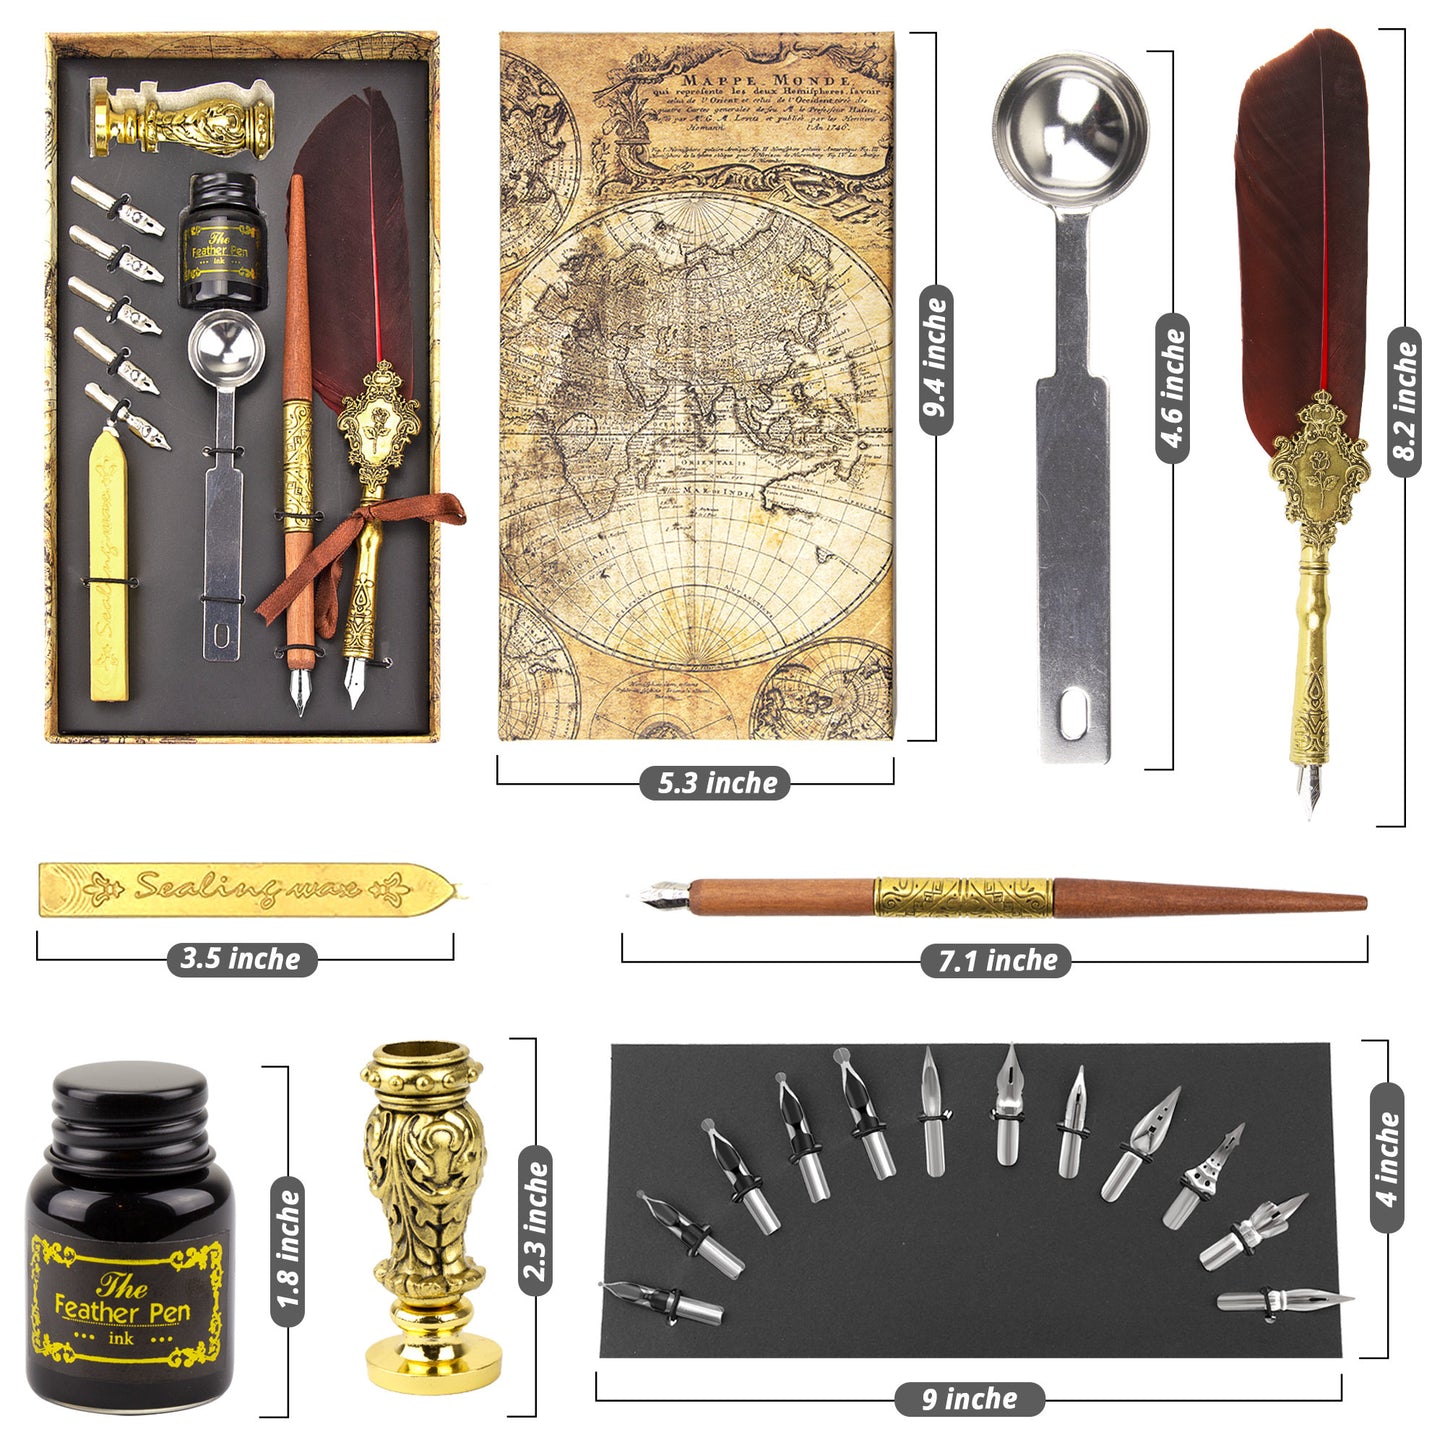 Trustela's Quill And Ink Wax Stamp Set - Wooden Pen, Feather Pen Antique, Dip Pen Stand/Seal, Nibs, Wax, Spoon And Ink Well In A Gift Box